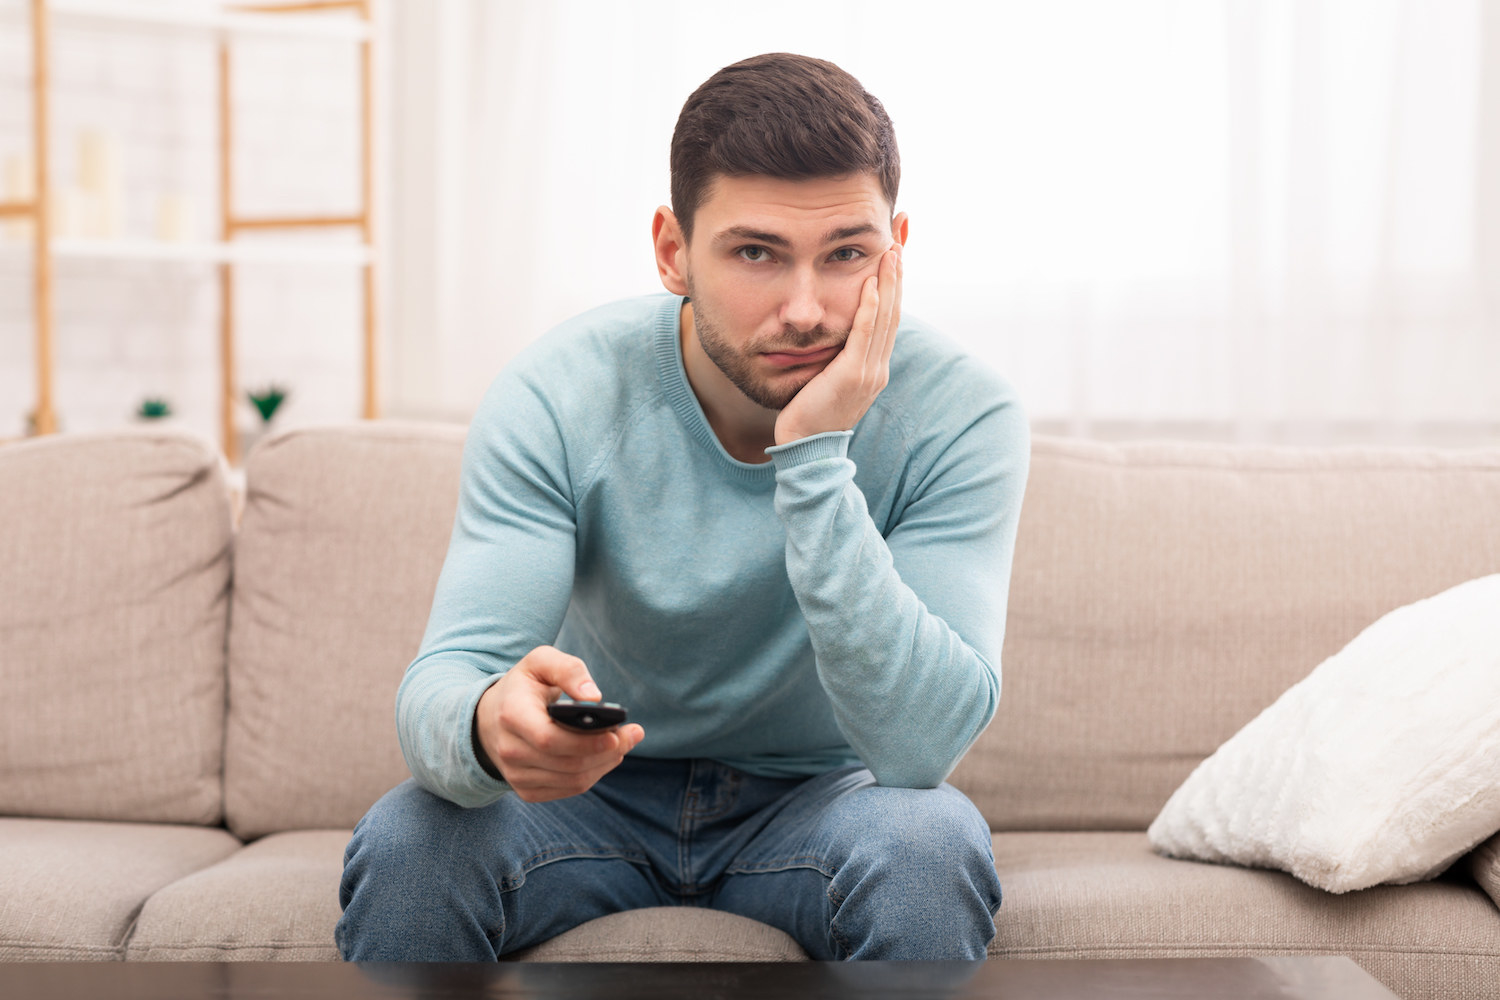 A man looking bored and holding a television remote